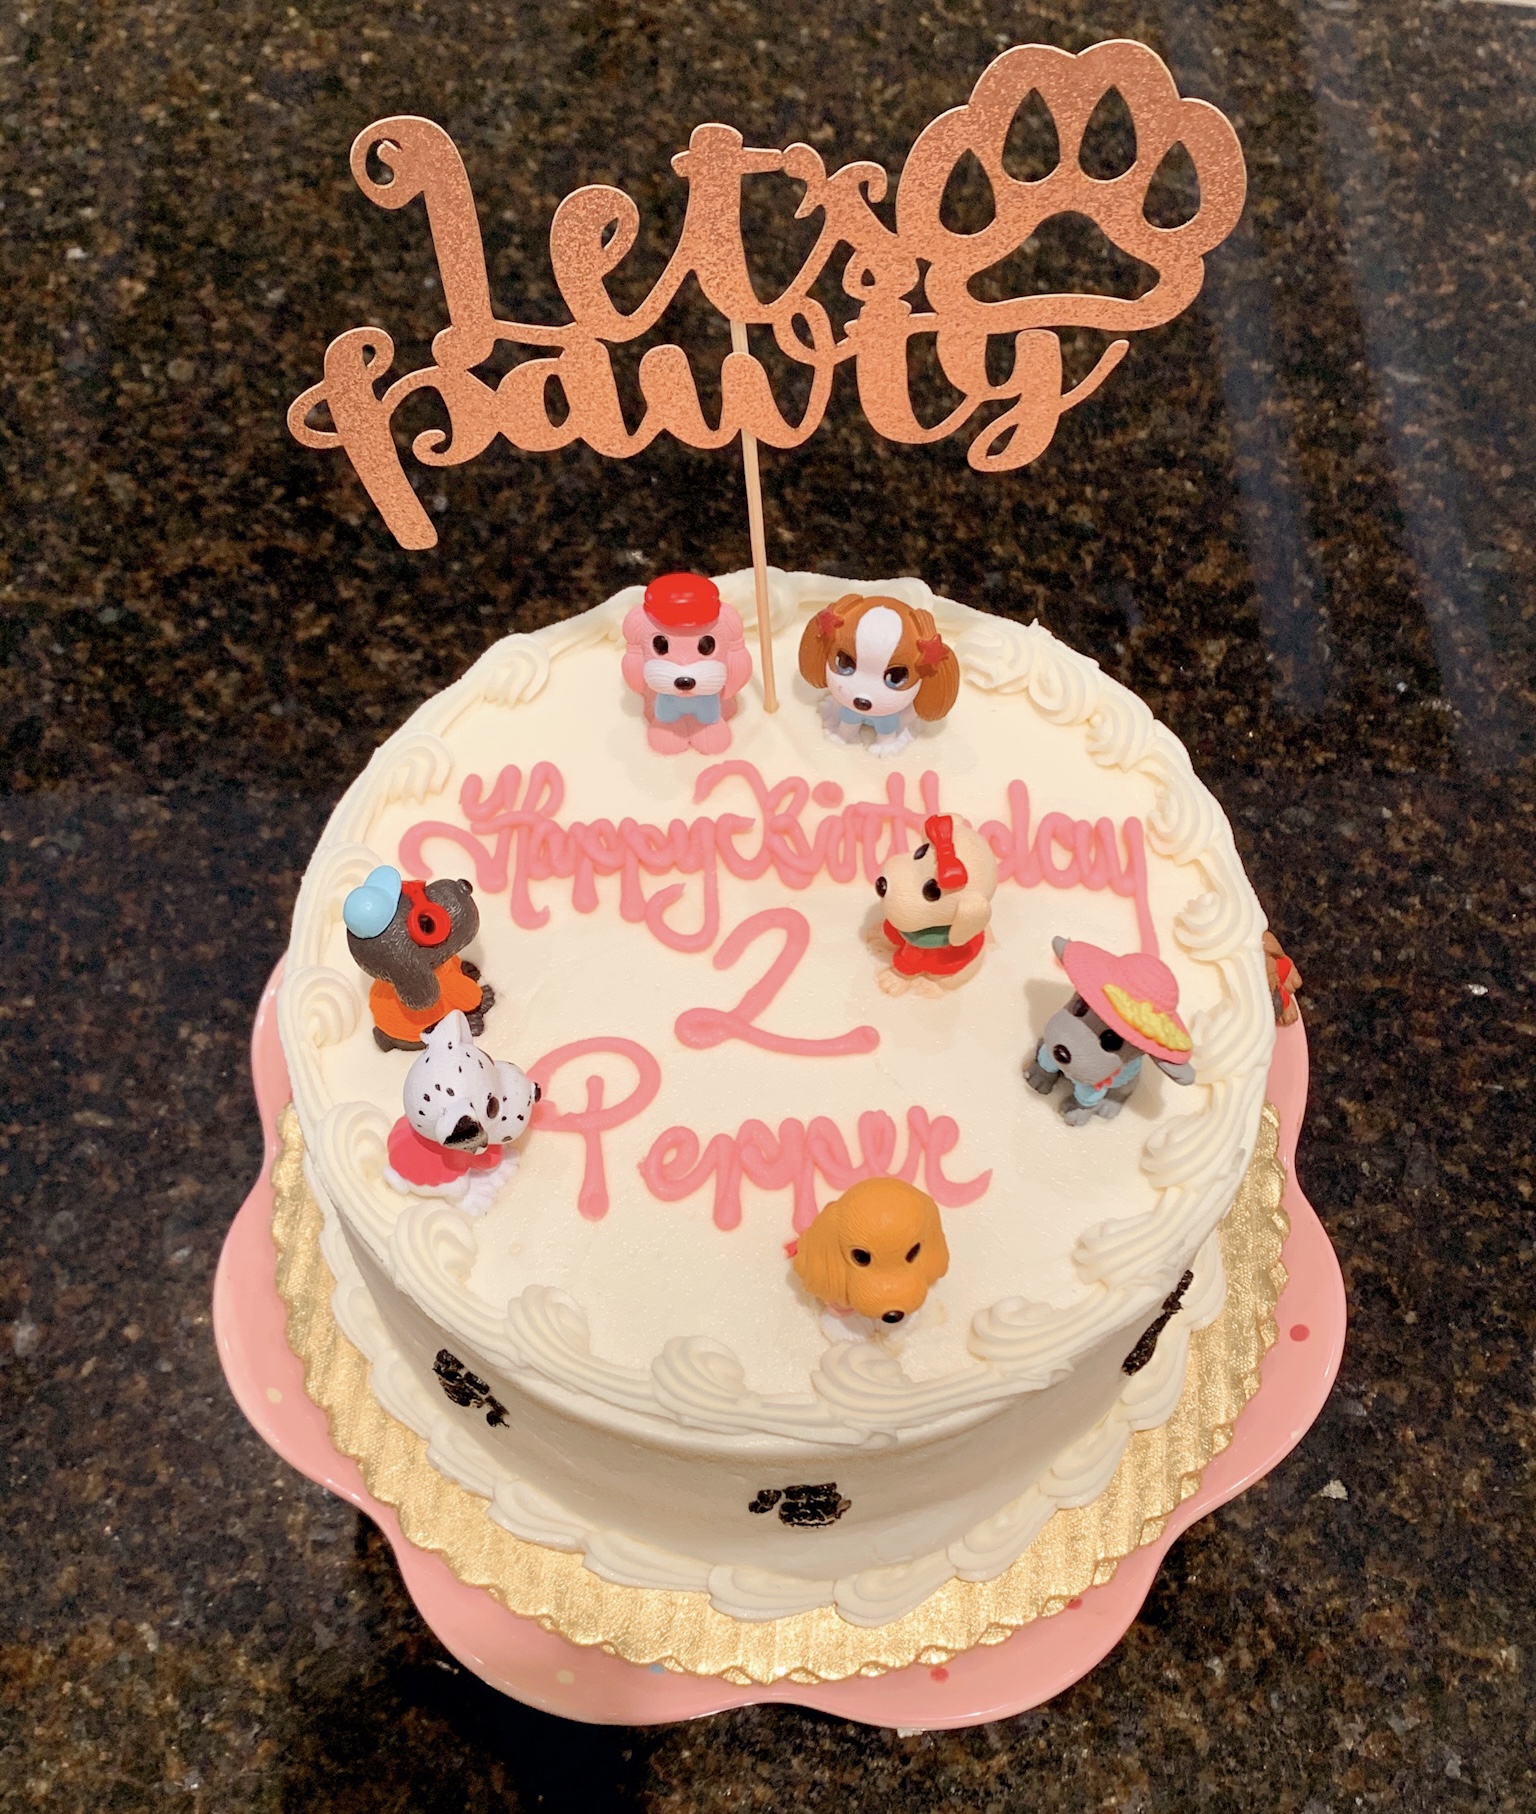 Pepper's 2nd Birthday "Puppy Paw-ty!" Creative party ideas via thinkingcloset.com - How to host a puppy-themed pawty with an adopt a puppy activity fun for all ages! And of course, we had a cake decorated to fit the puppy theme!